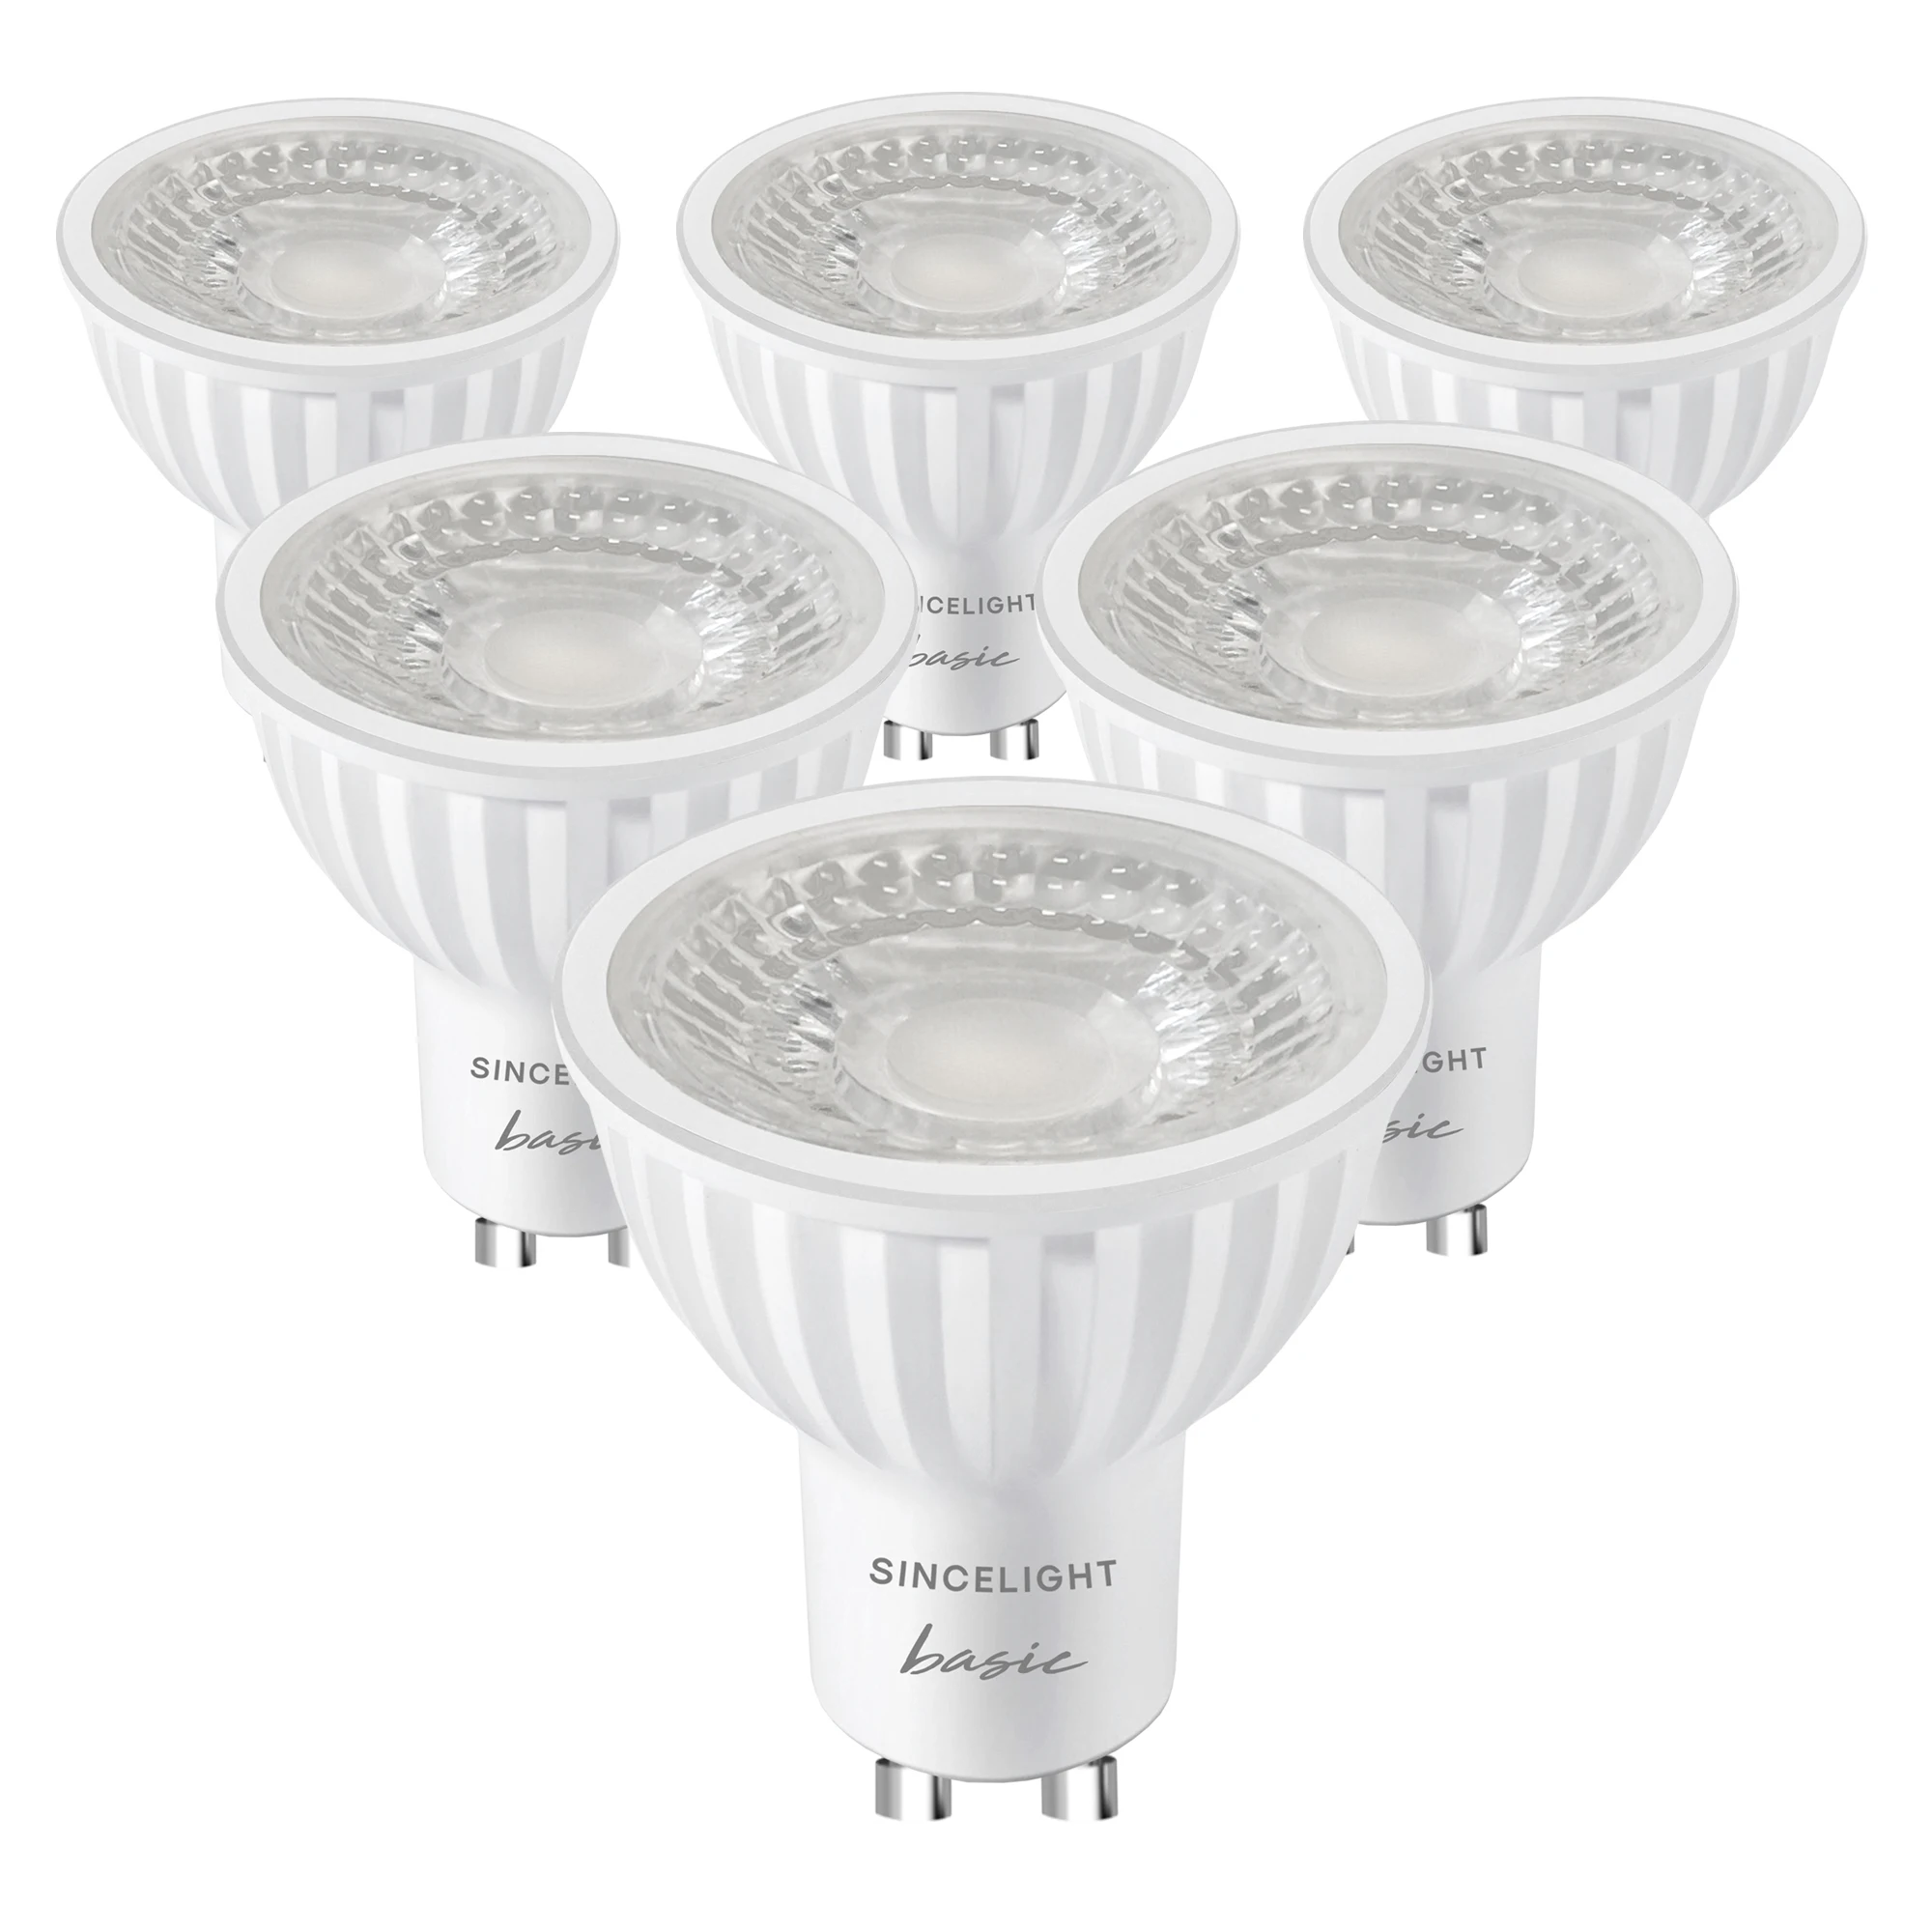 Pack of 6/12, PAR16 LED Downlights Bulb with GU10 Base,6W,2700K,4000K,6000K(Non-Dimmable/38° Beam Angle/RA≈92/Spot Light)